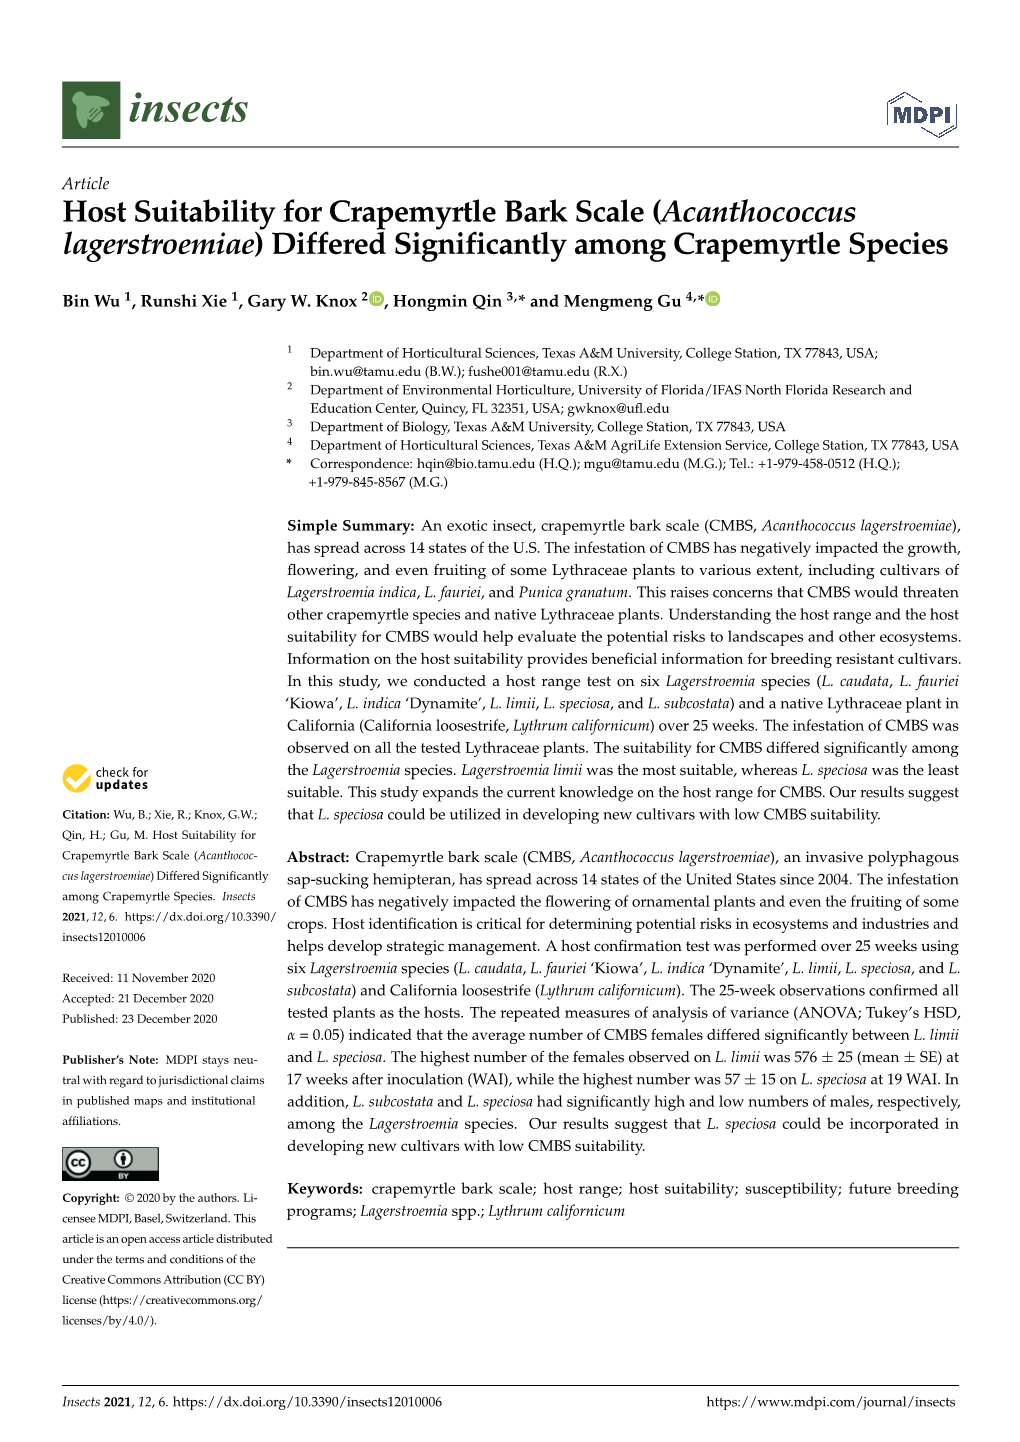 Host Suitability for Crapemyrtle Bark Scale (Acanthococcus Lagerstroemiae) Differed Significantly Among Crapemyrtle Species